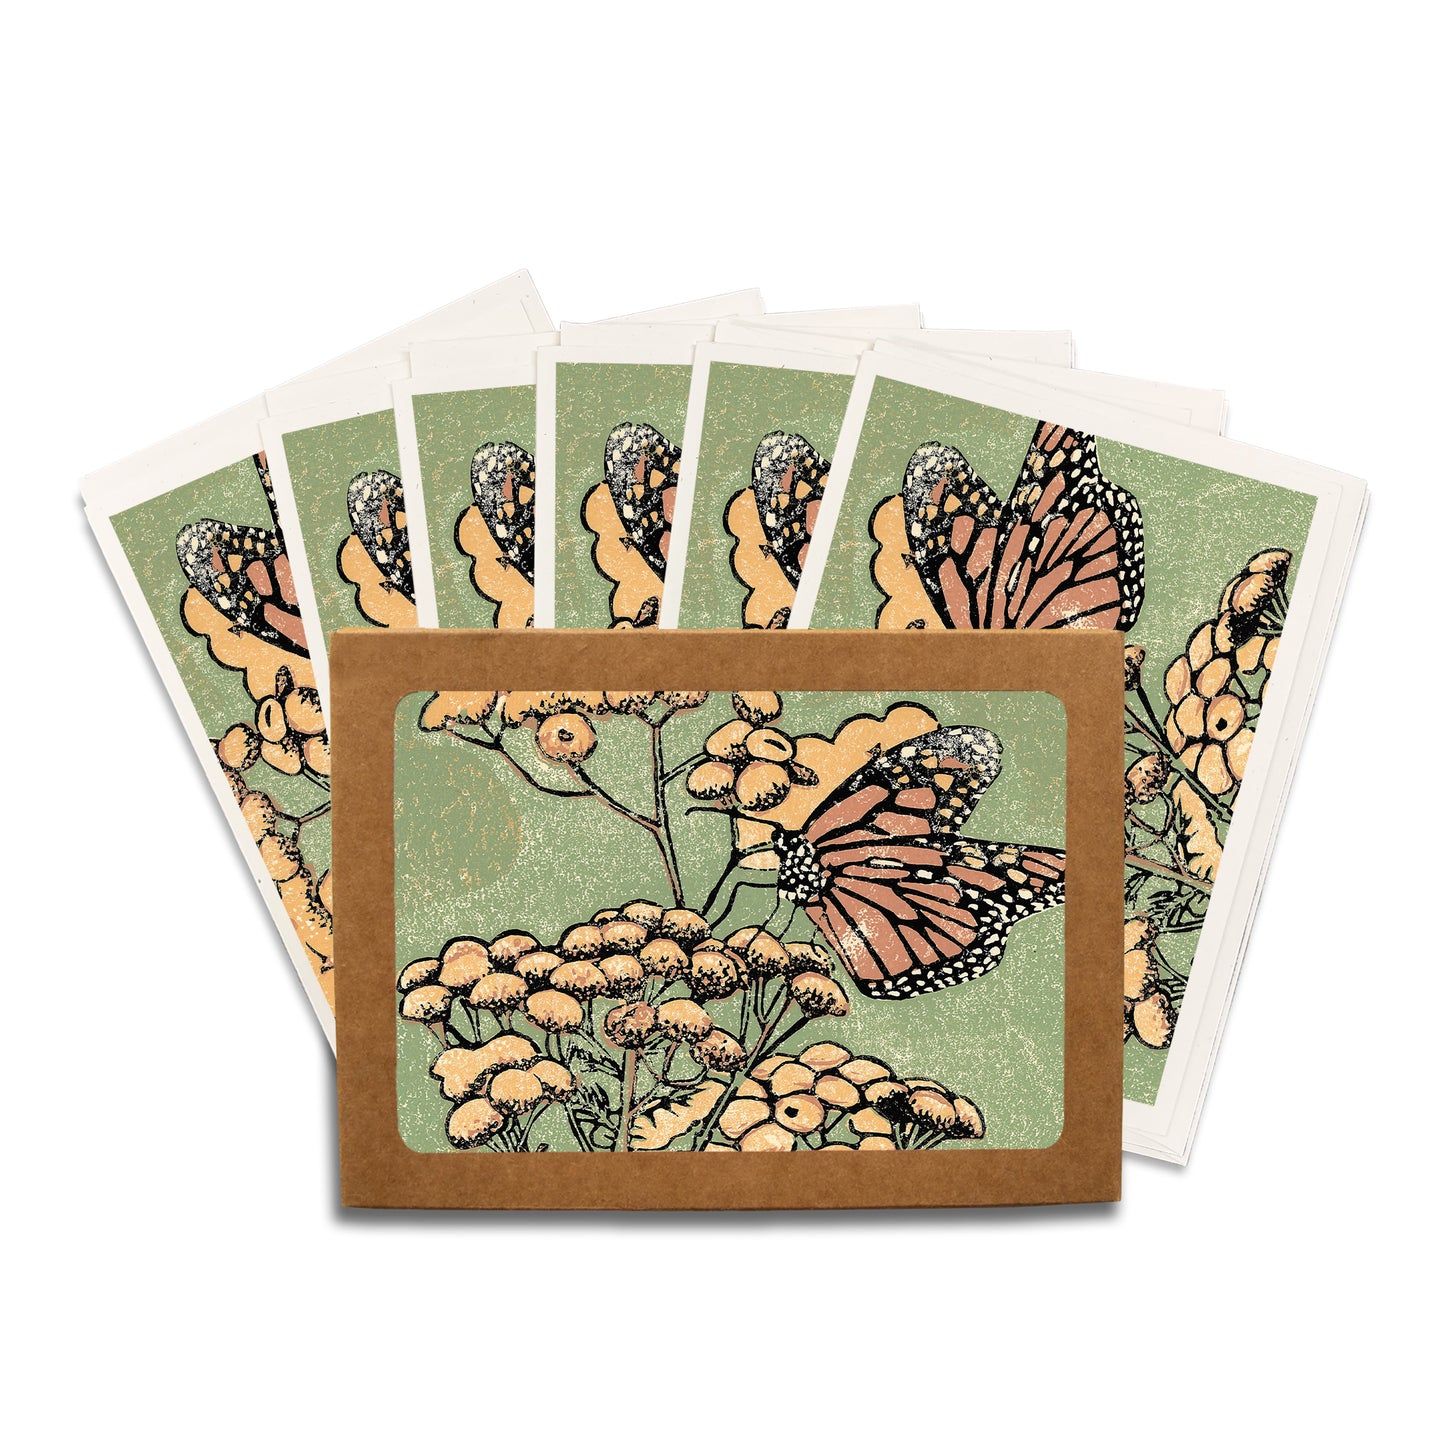 Monarch on Tansy greeting card by Natalia Wohletz of Peninsula Prints.